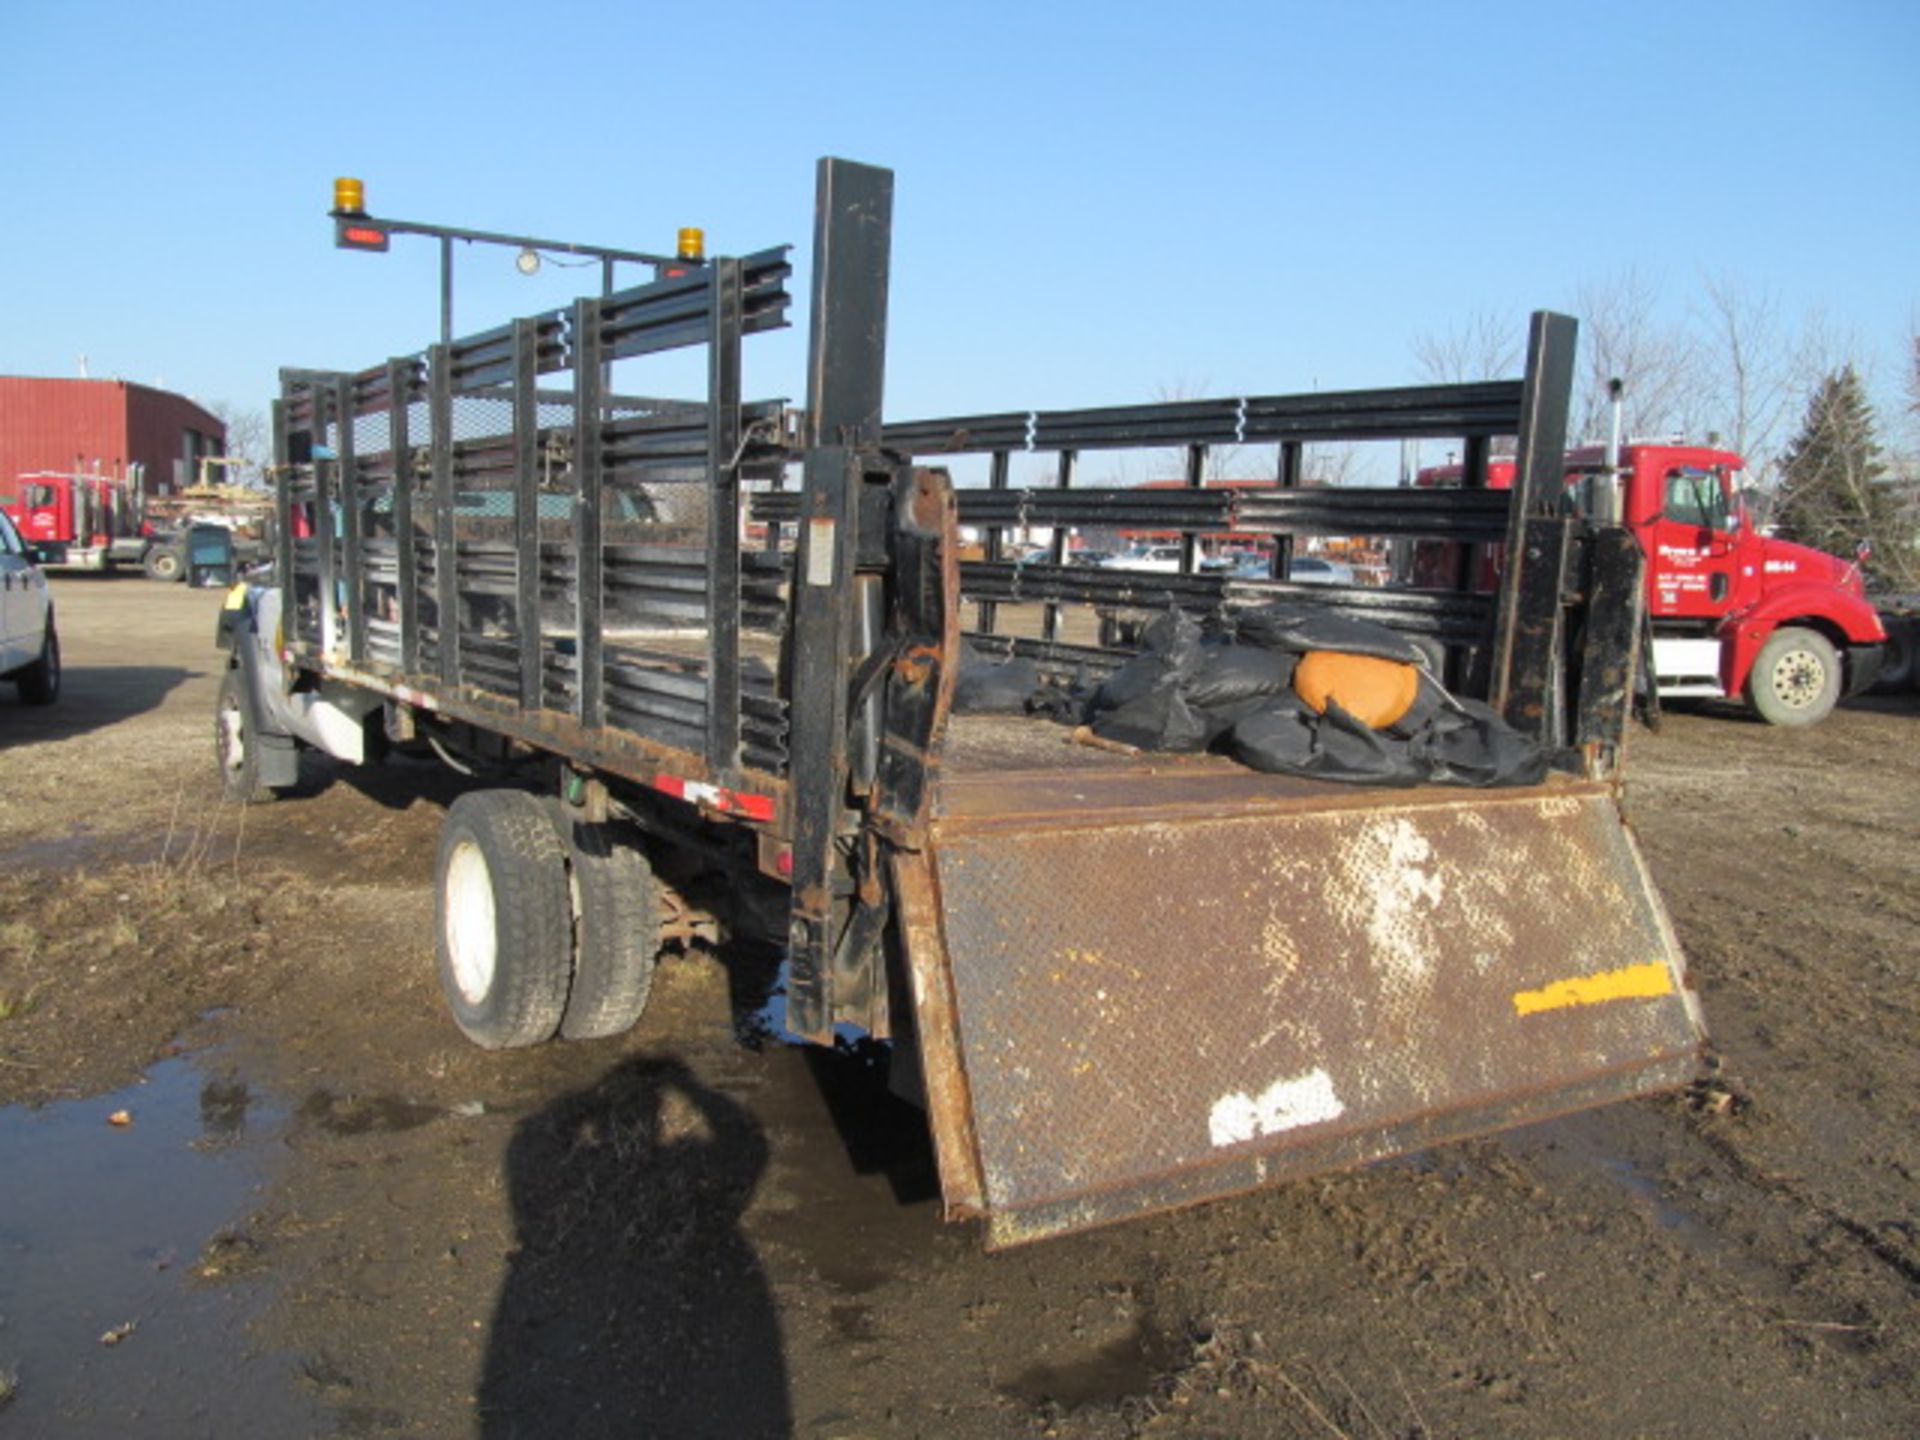 2012 Ford F450 Stakebed Truck with Lift Gate (VIN: 1FDUFGT0CEB54699) [Estimated Mileage: 105698. - Image 3 of 4